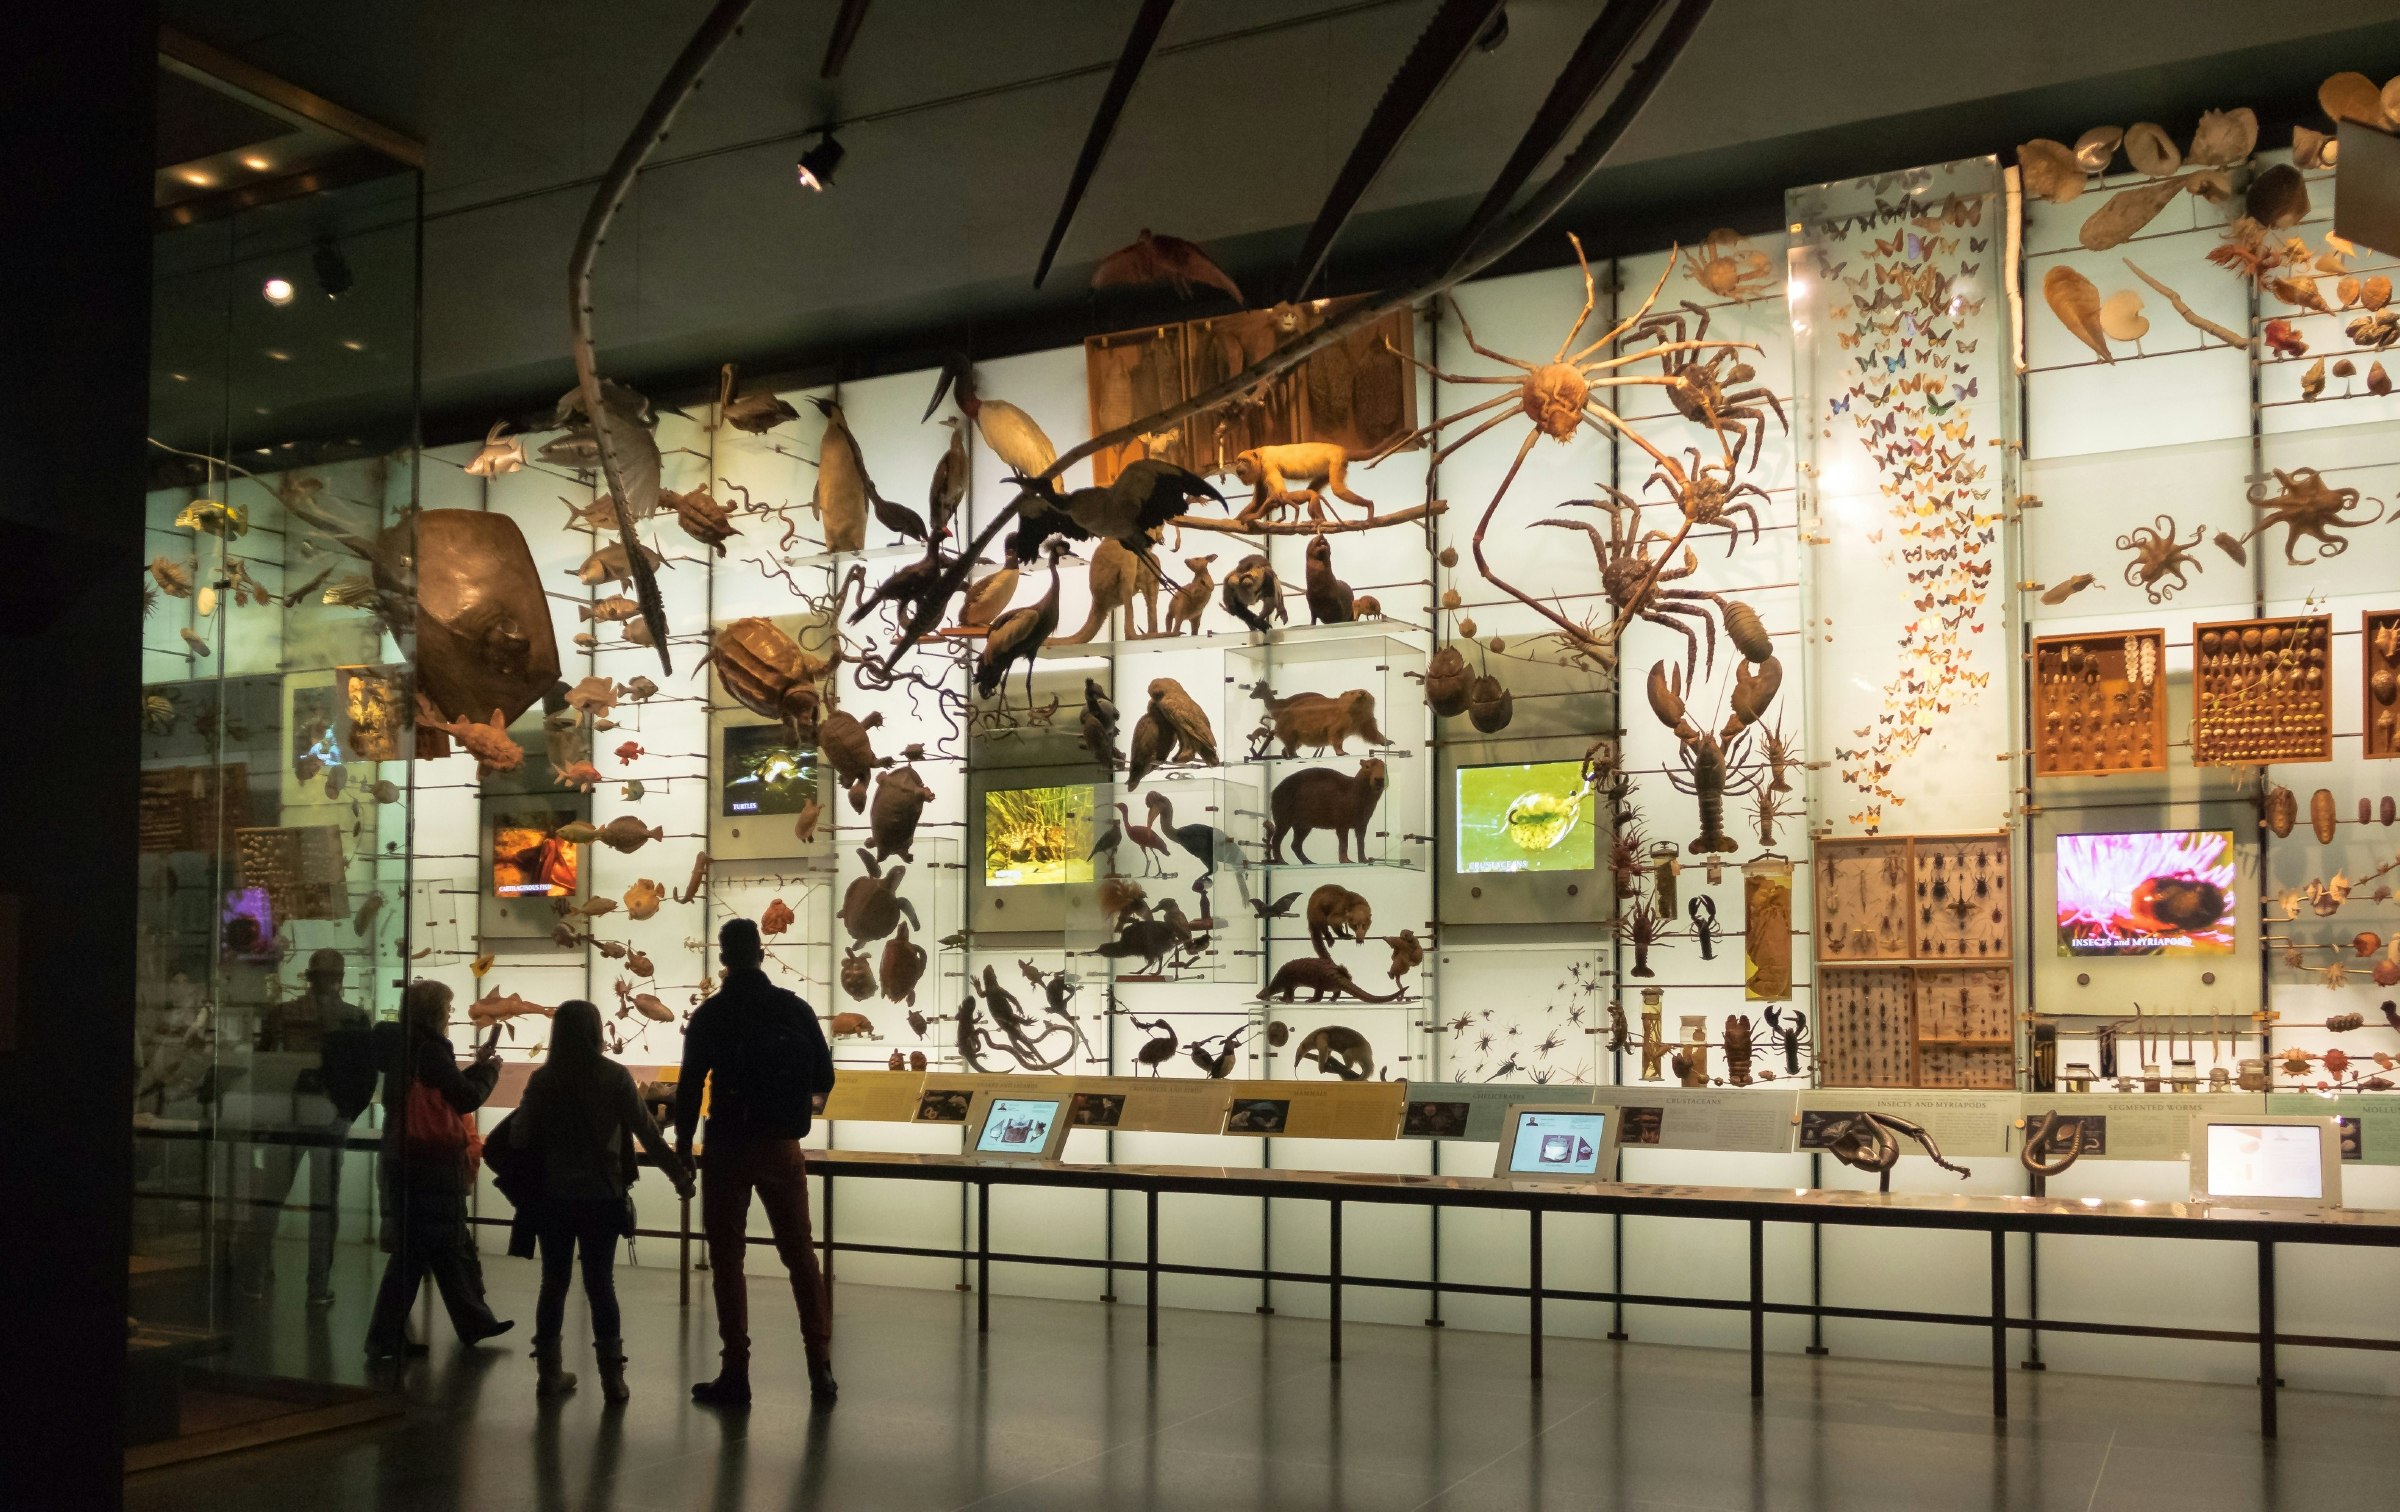 Visitors look at exhibits inside the Hall of Biodiversity at the American Museum of Natural History in New York City.  